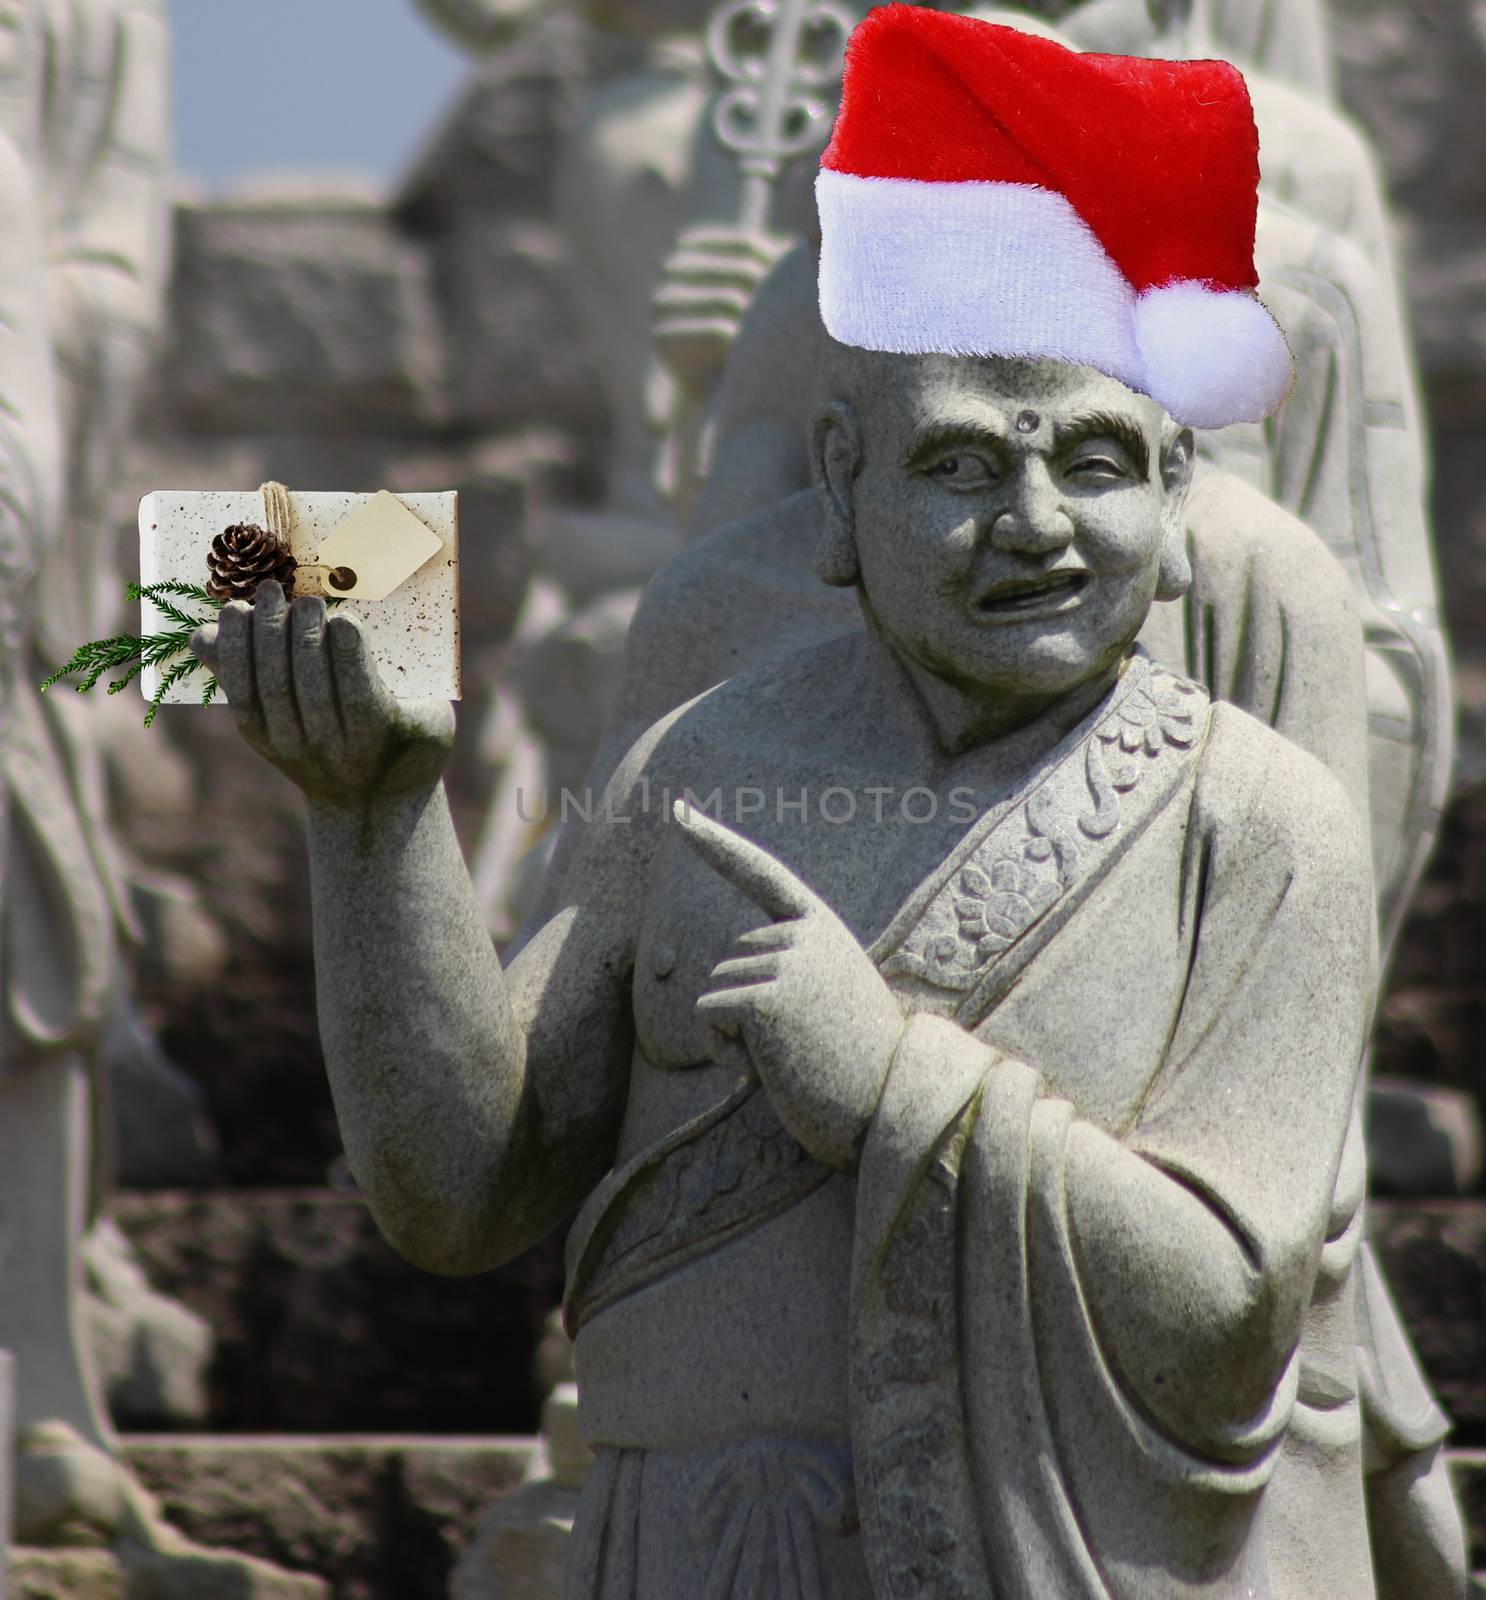 Christmas stone buddhist monk statue pointing at the gift with blank card he is holding and wearing a red santa claus hat